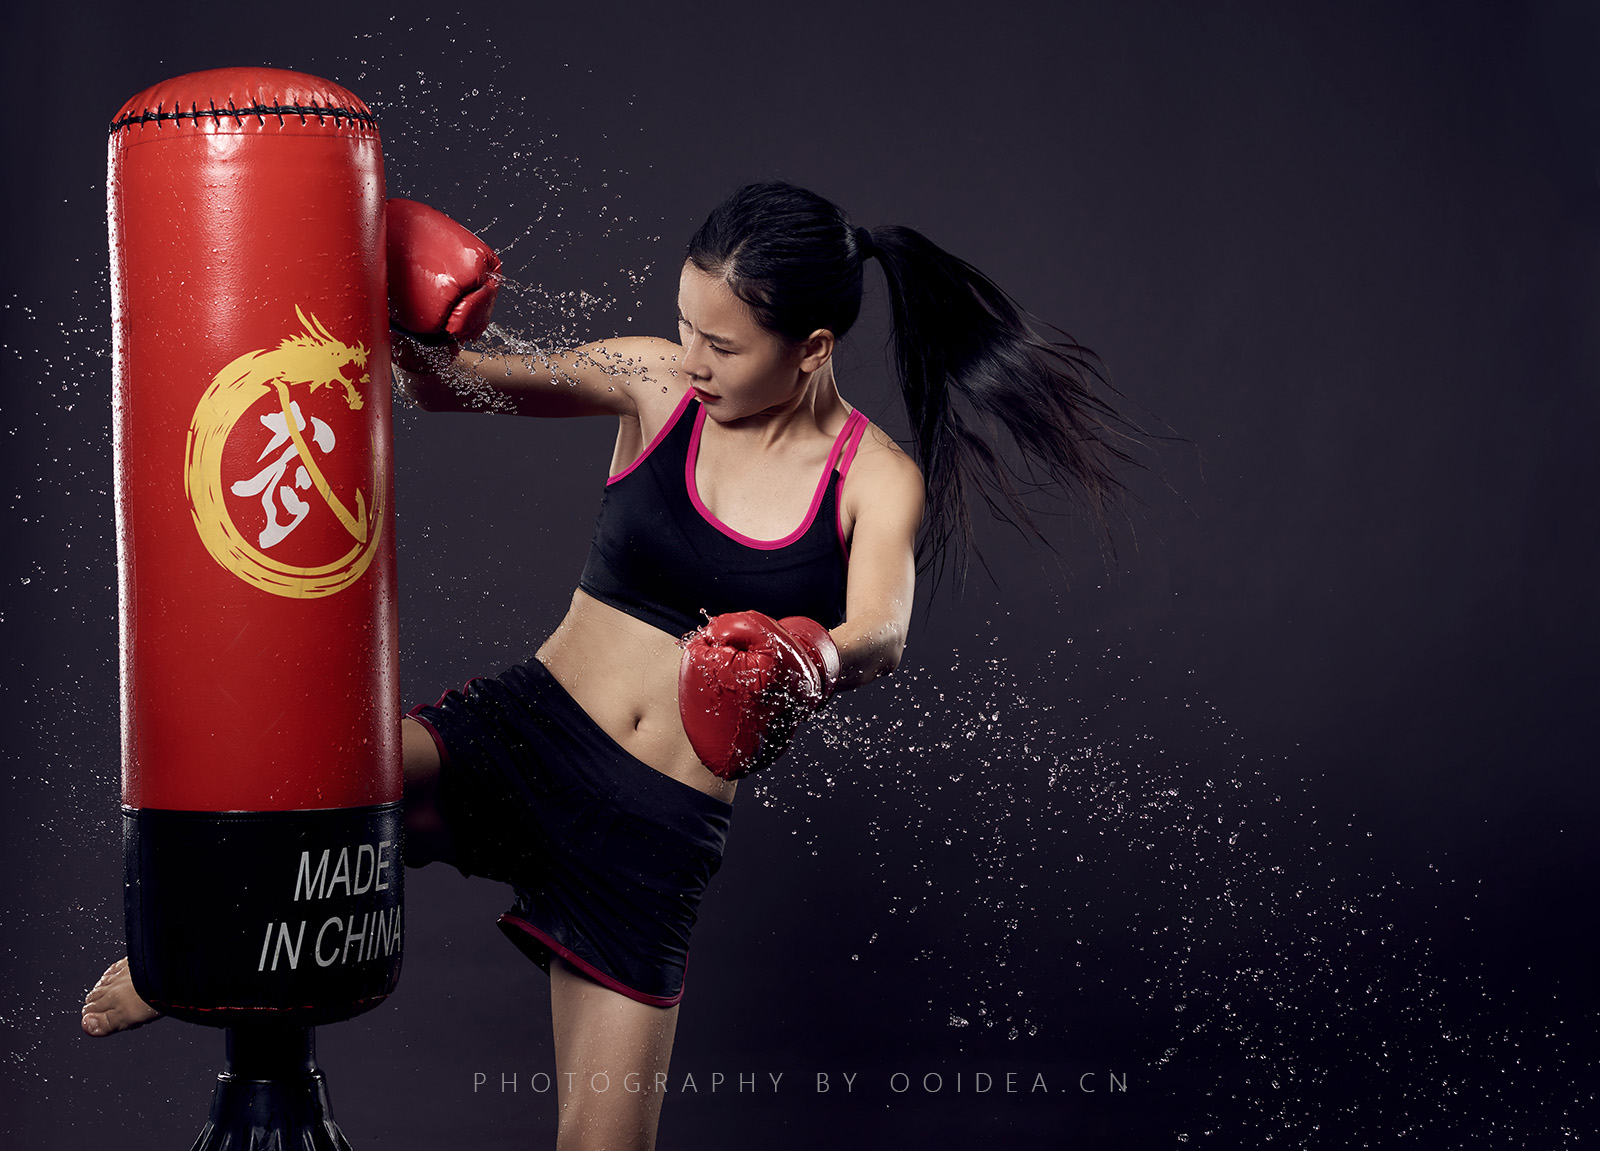 Boxing Girl Wallpapers - Top Free Boxing Girl Backgrounds - WallpaperAccess